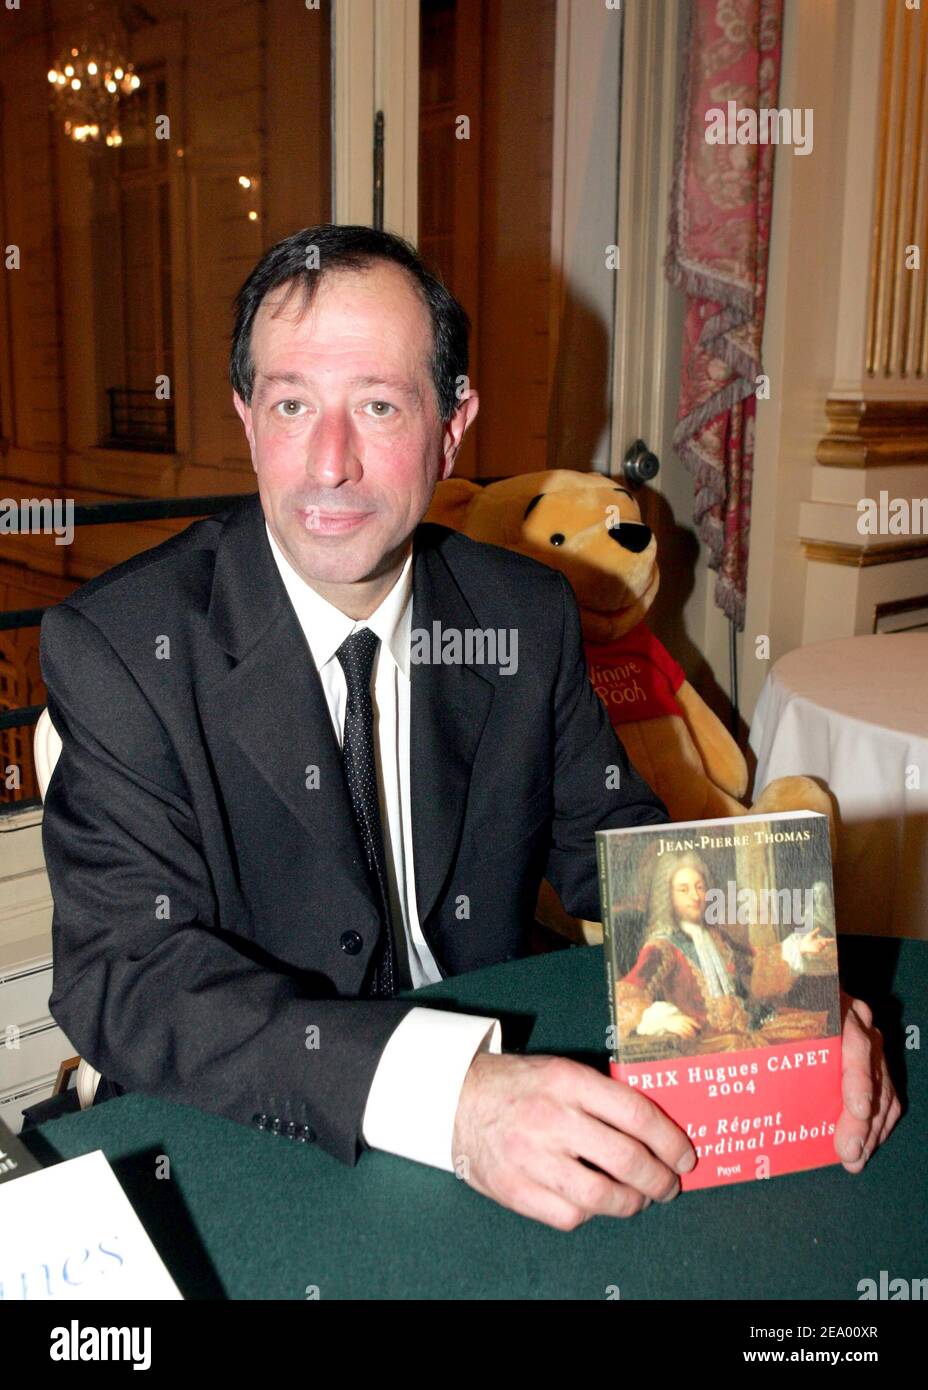 French historian Jean-Pierre Thomas is awarded with the '2004 Hugues Capet Prize' for his book 'Le Regent et le Cardinal Dubois', during a ceremony held at the Cercle de l'Union Interalliee in Paris, France on February 7, 2005.Photo by Laurent Zabulon/ABACA. Stock Photo